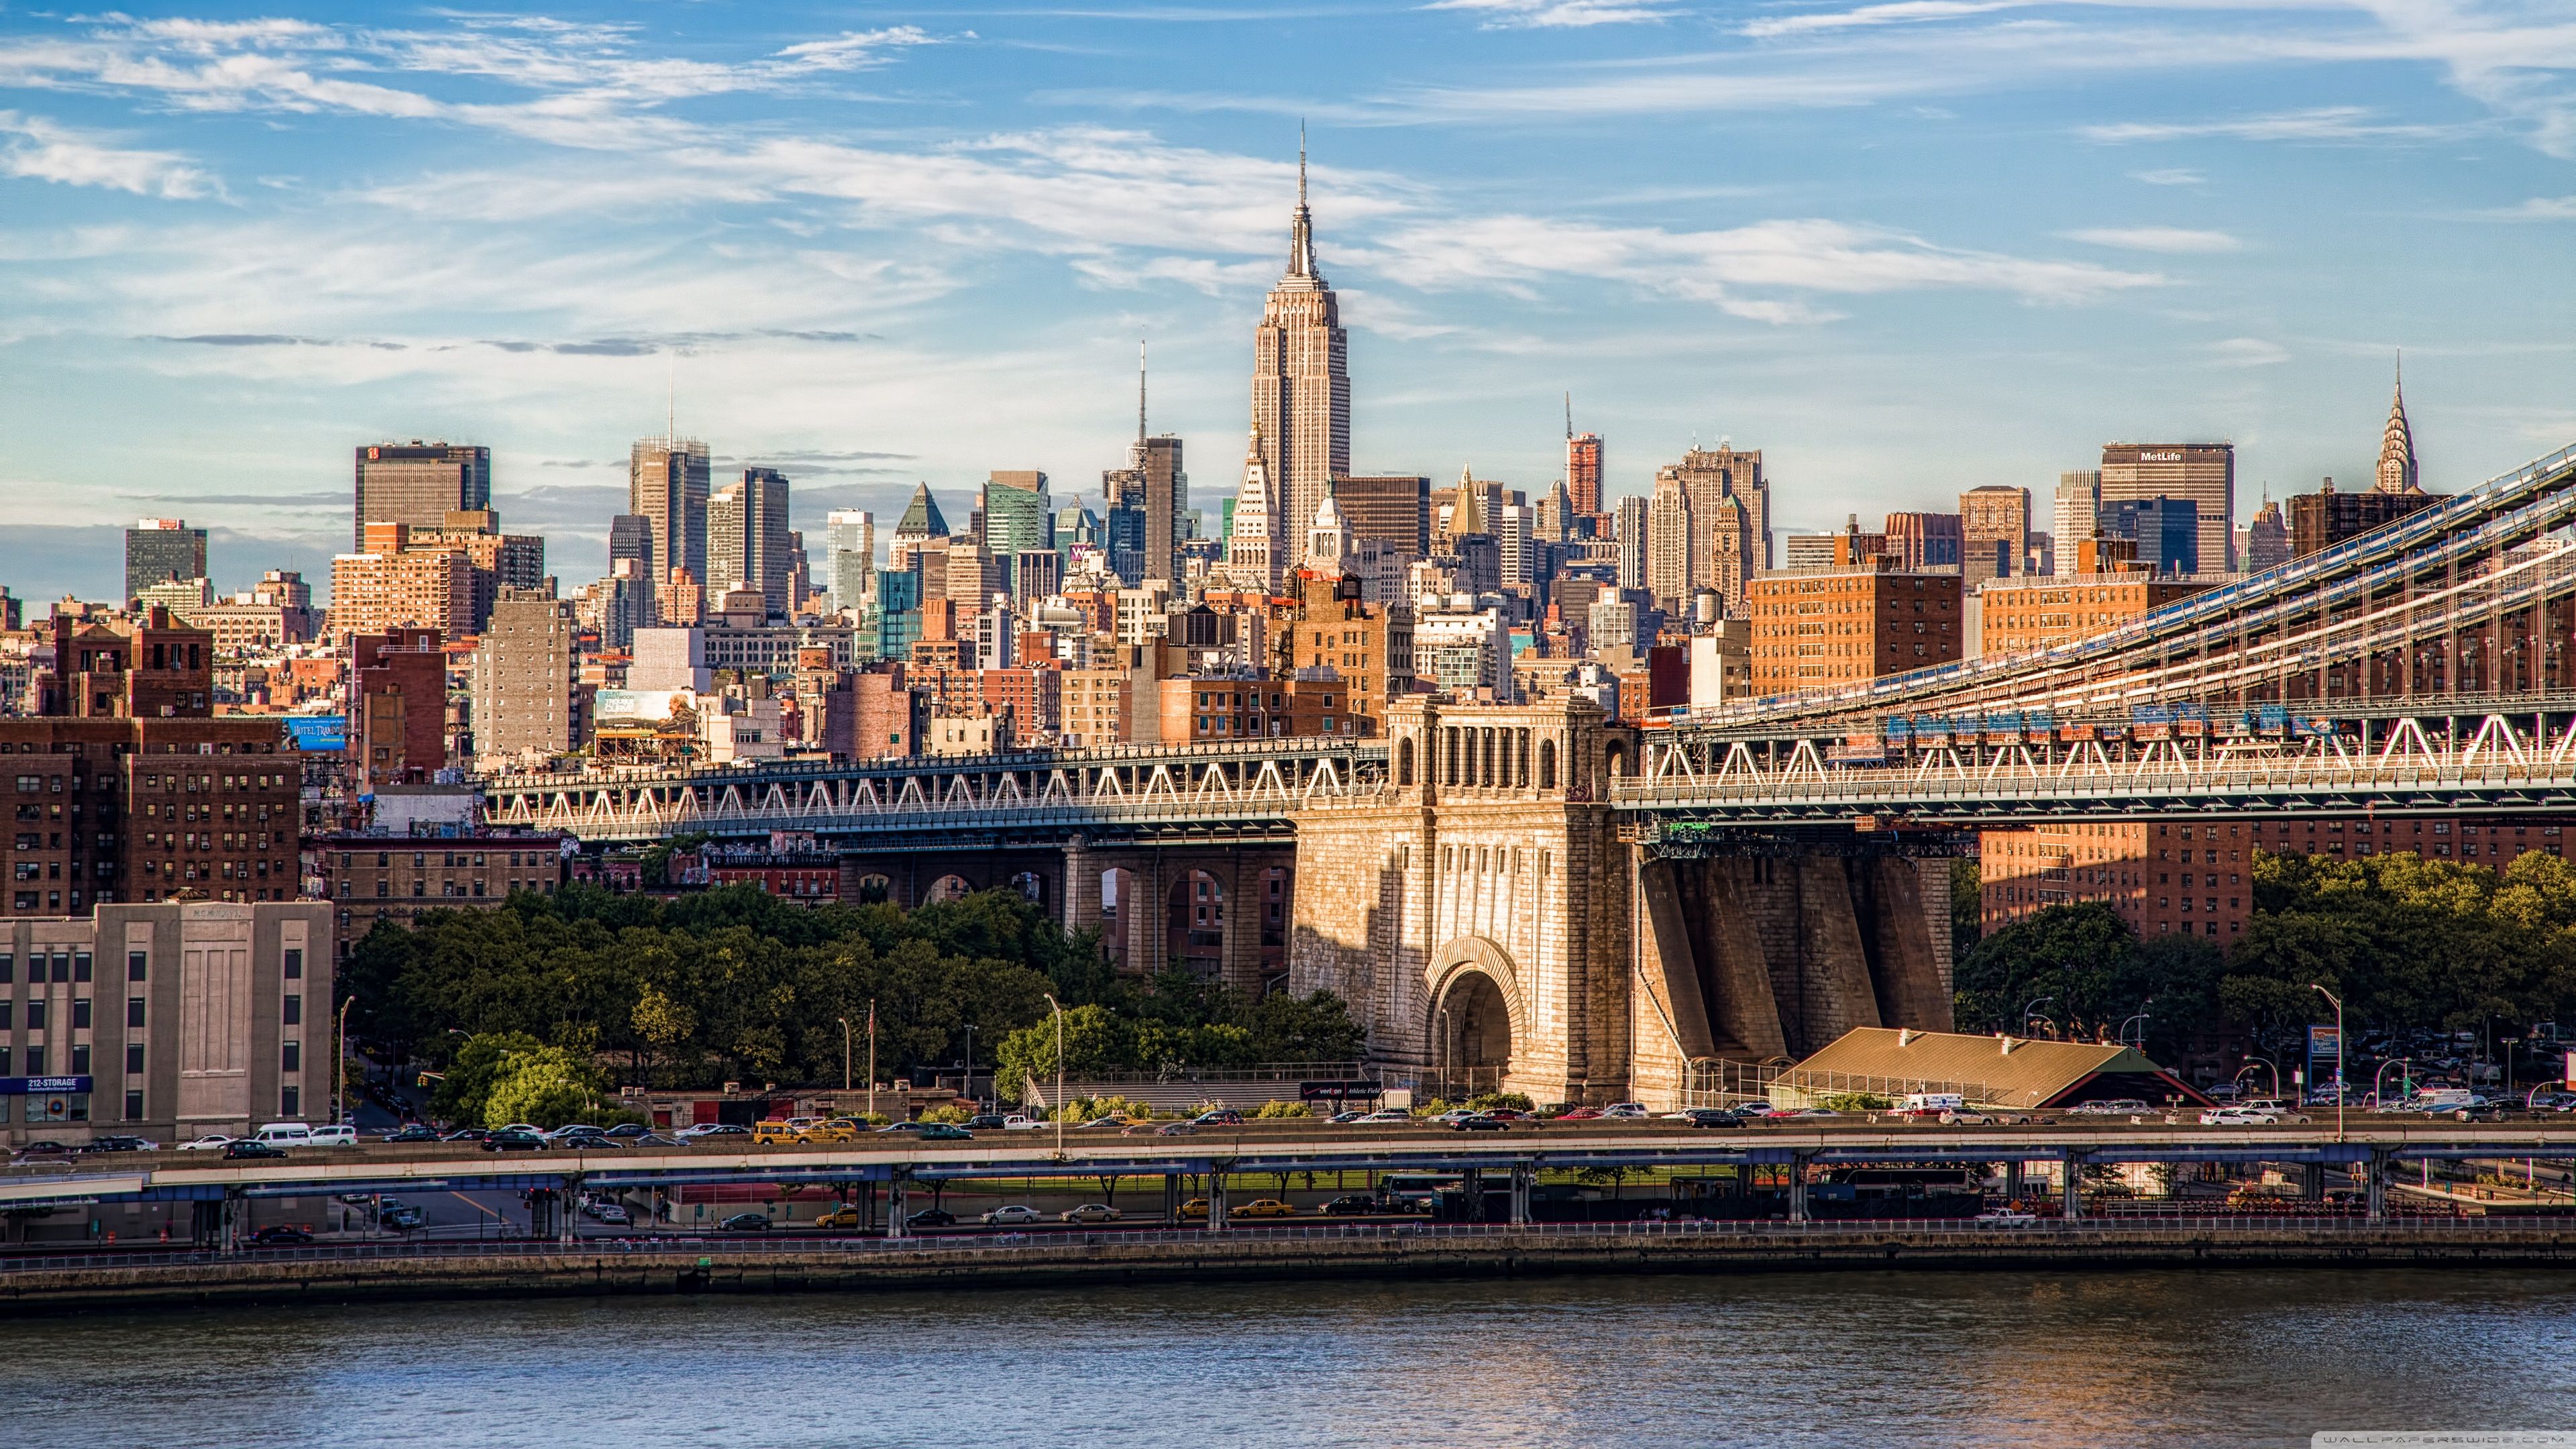 Manhattan 4K wallpaper for your desktop or mobile screen free and easy to download